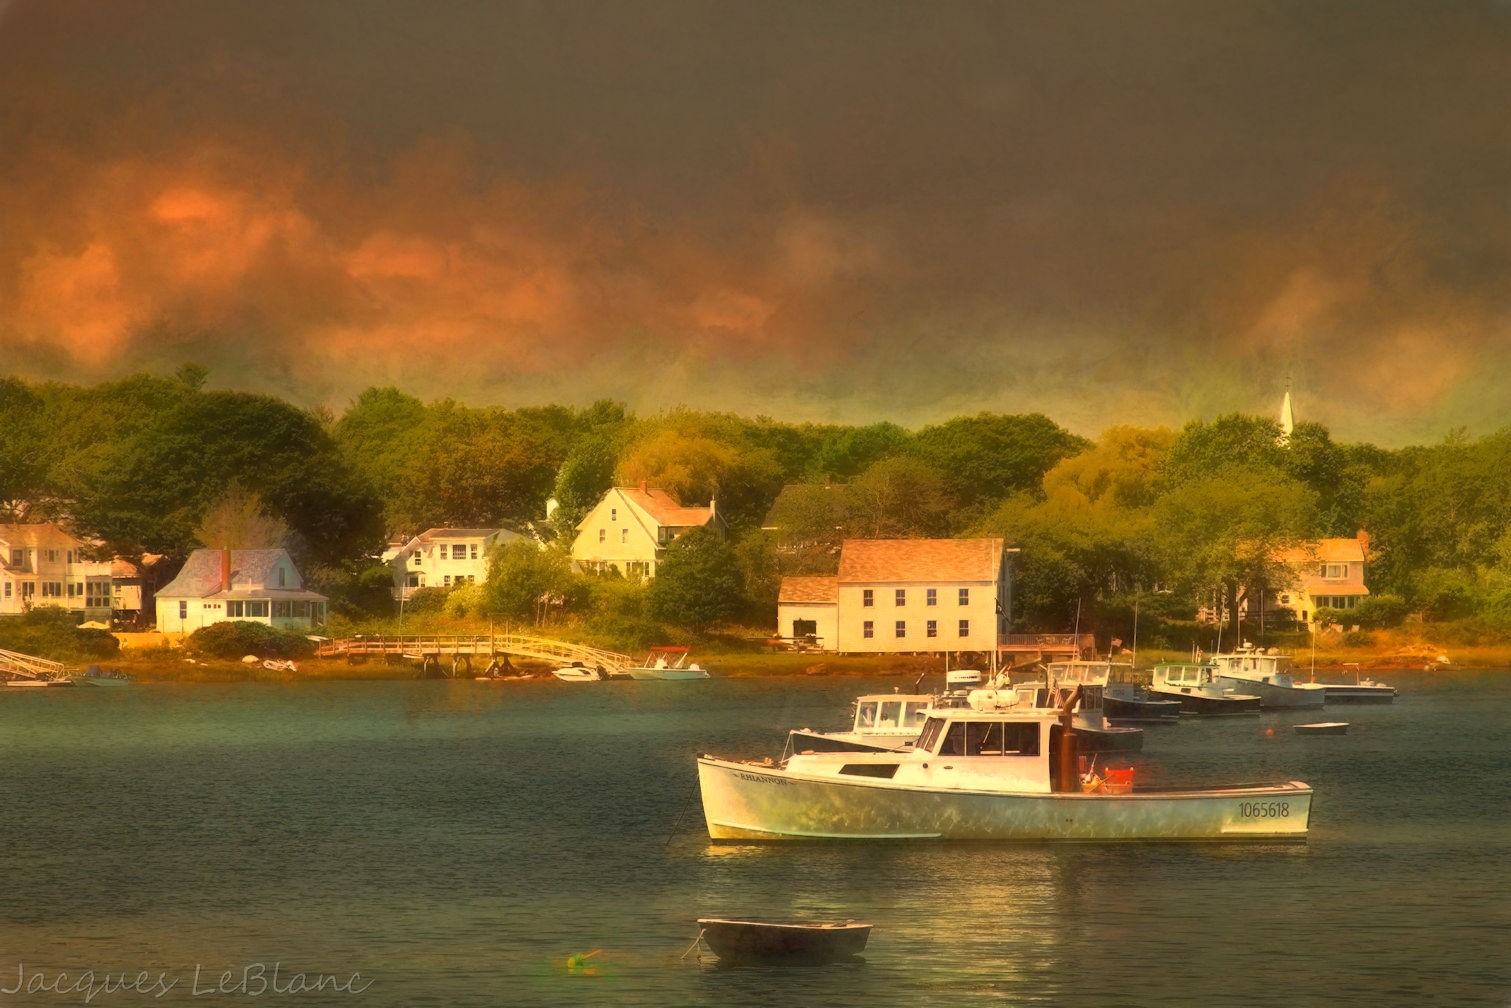 The fishing boats are lined up at sunset for another day's work in Porpose, Maine.